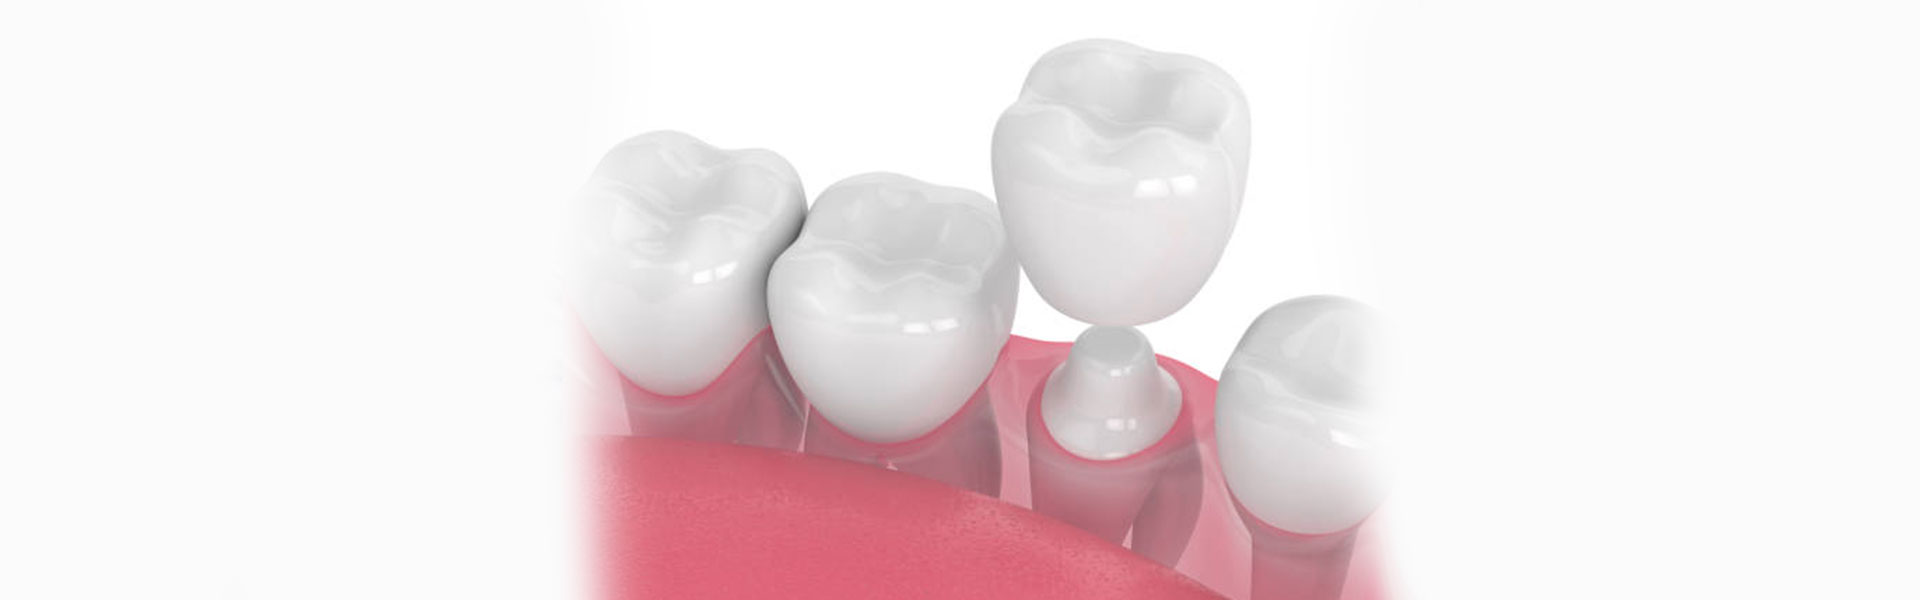 When and Why Dental Crowns Are Recommended?